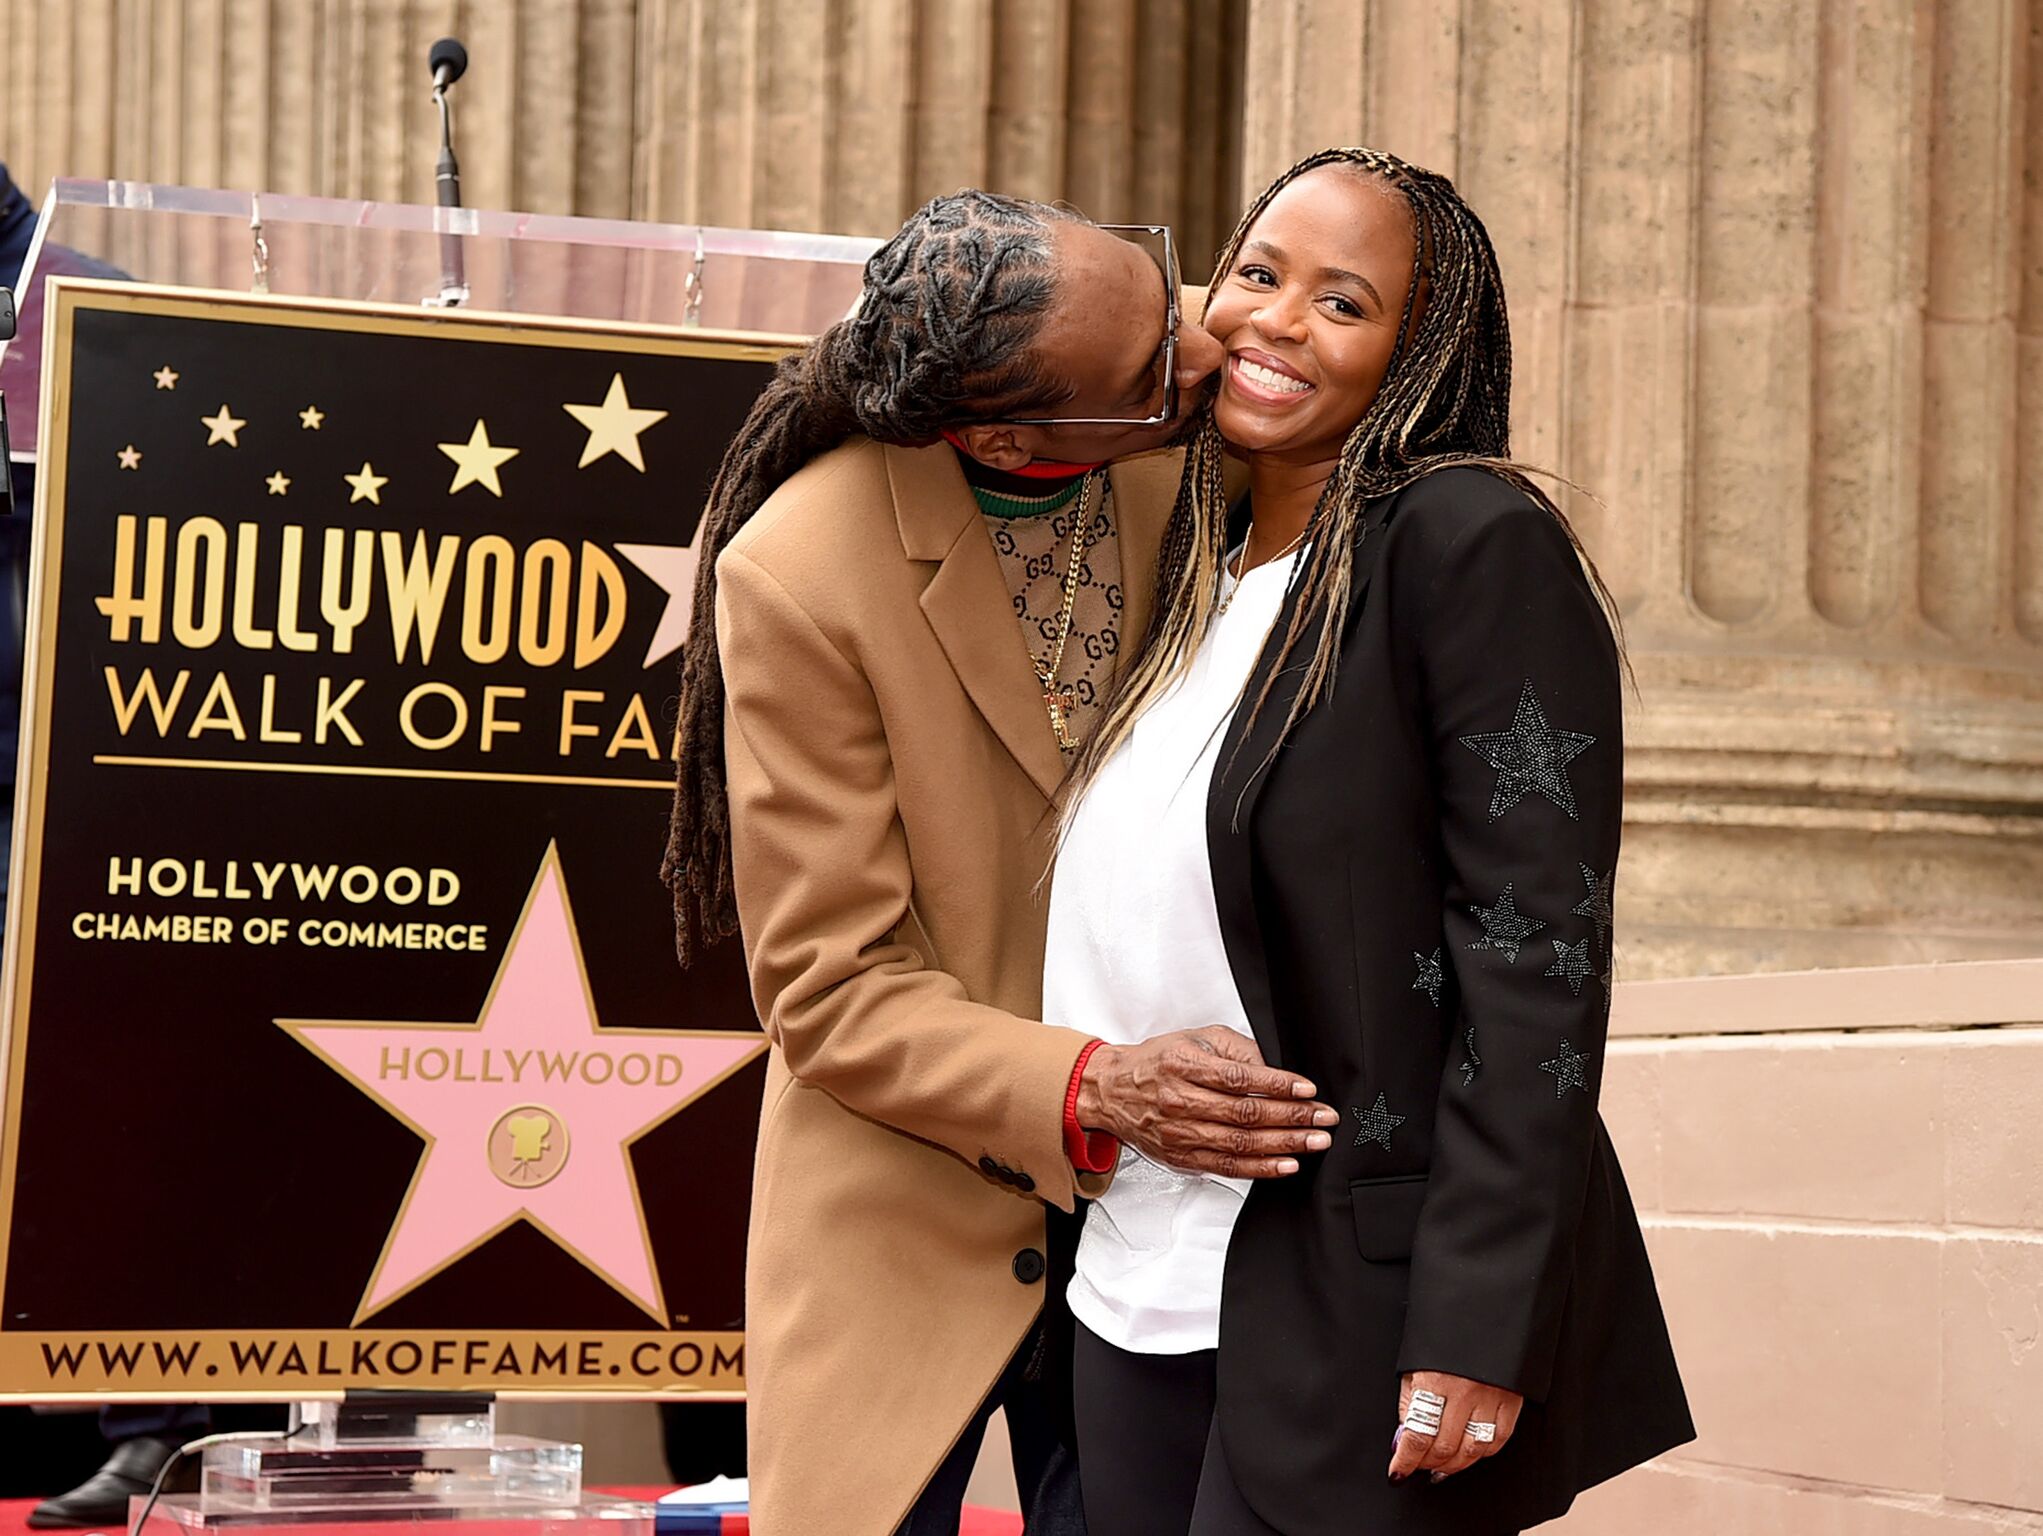 Snoop Dogg, with his wife Shante Broadus, is honored with a star on The Hollywood Walk Of Fame on Hollywood Boulevard | Getty Images